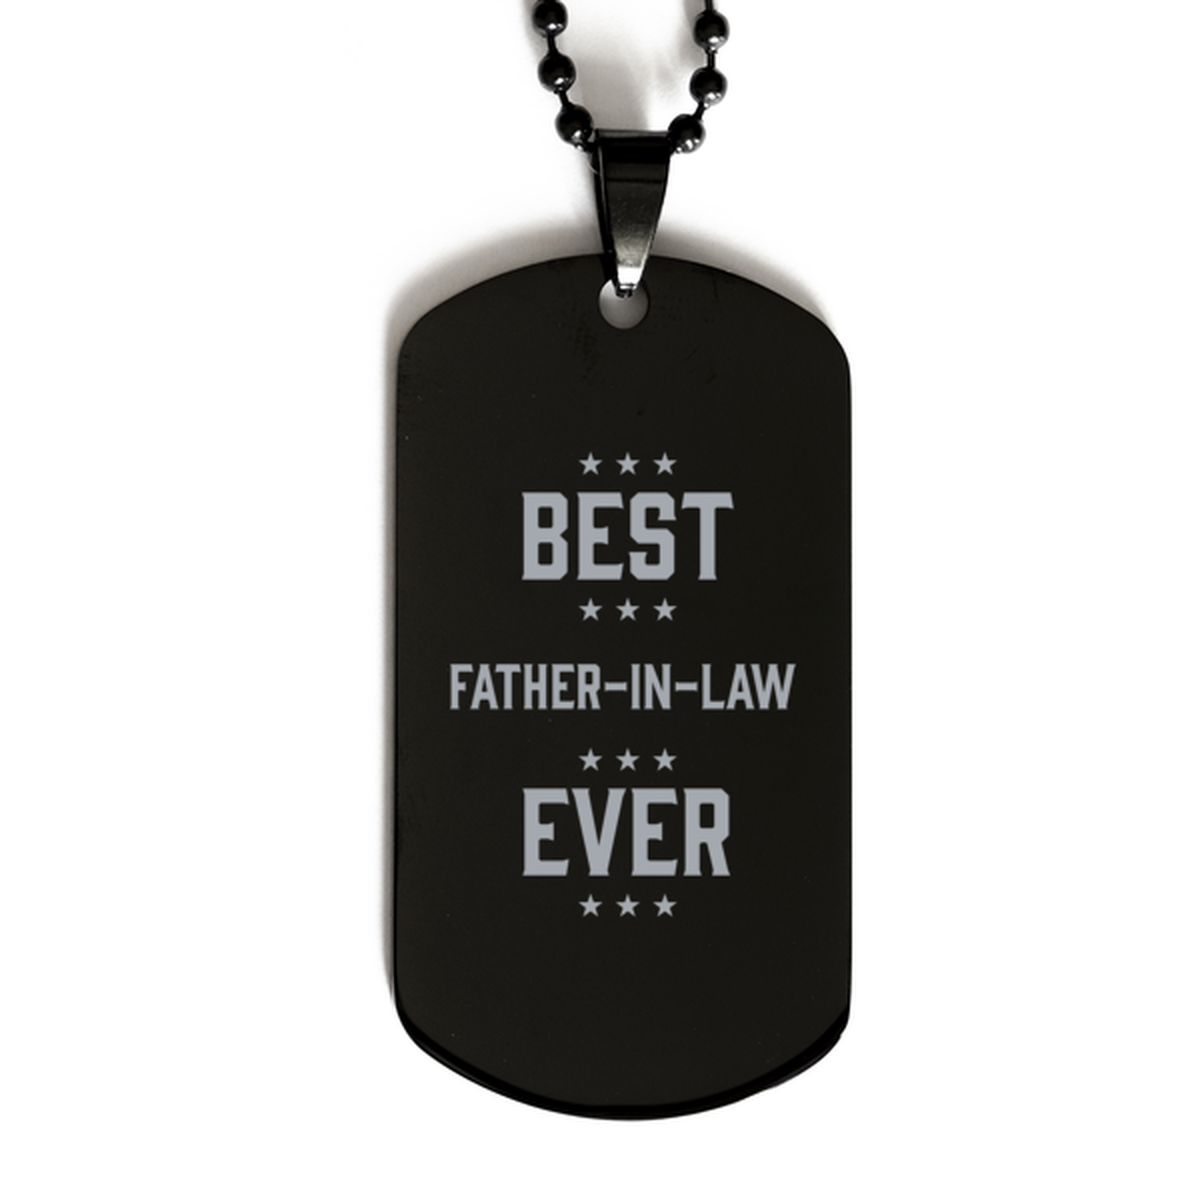 Best Father-in-law Ever Father-in-law Gifts, Funny Black Dog Tag For Father-in-law, Birthday Family Presents Engraved Necklace For Men